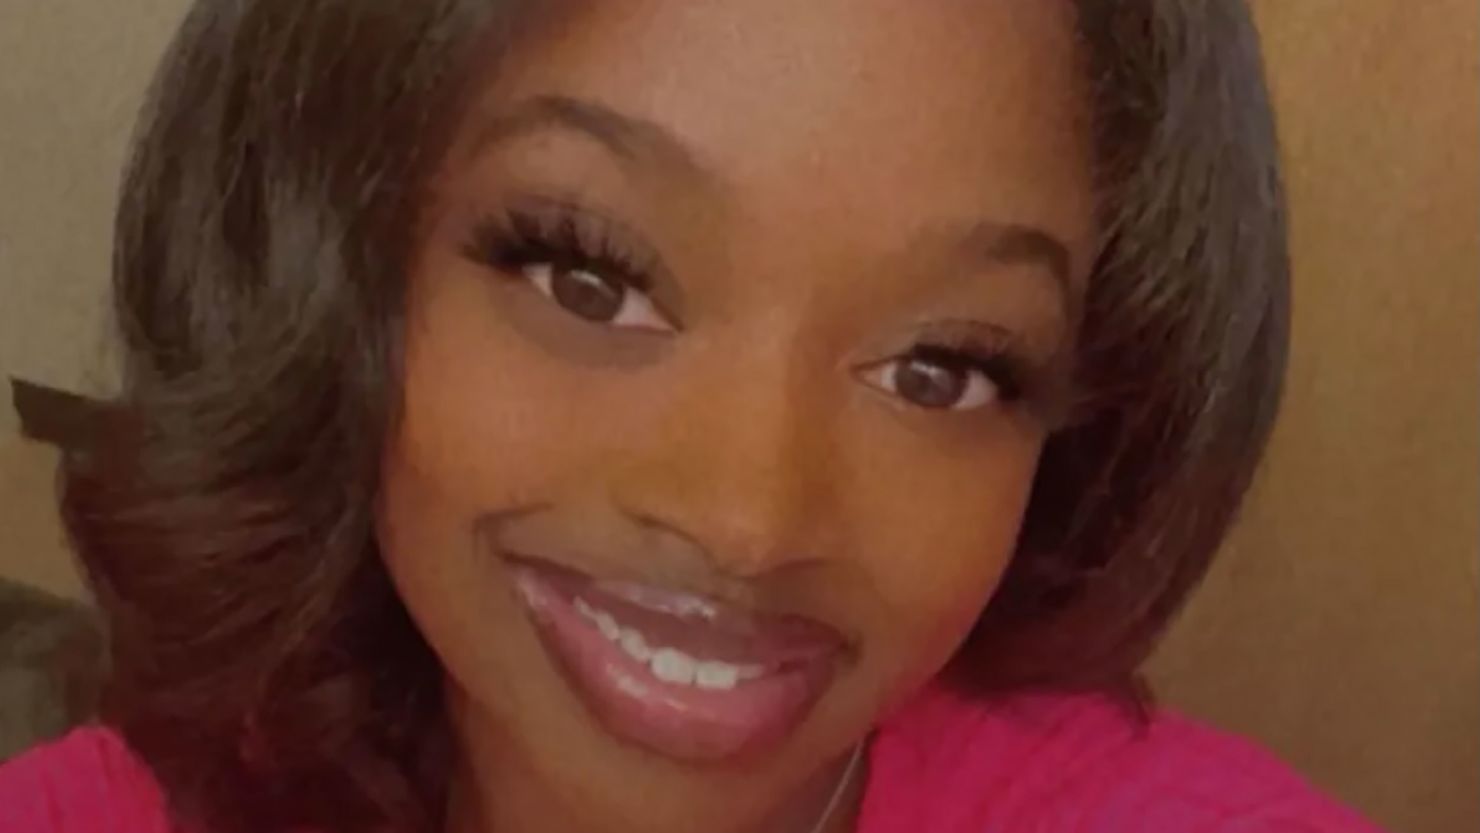 Sade Robinson was reported missing on April 2.